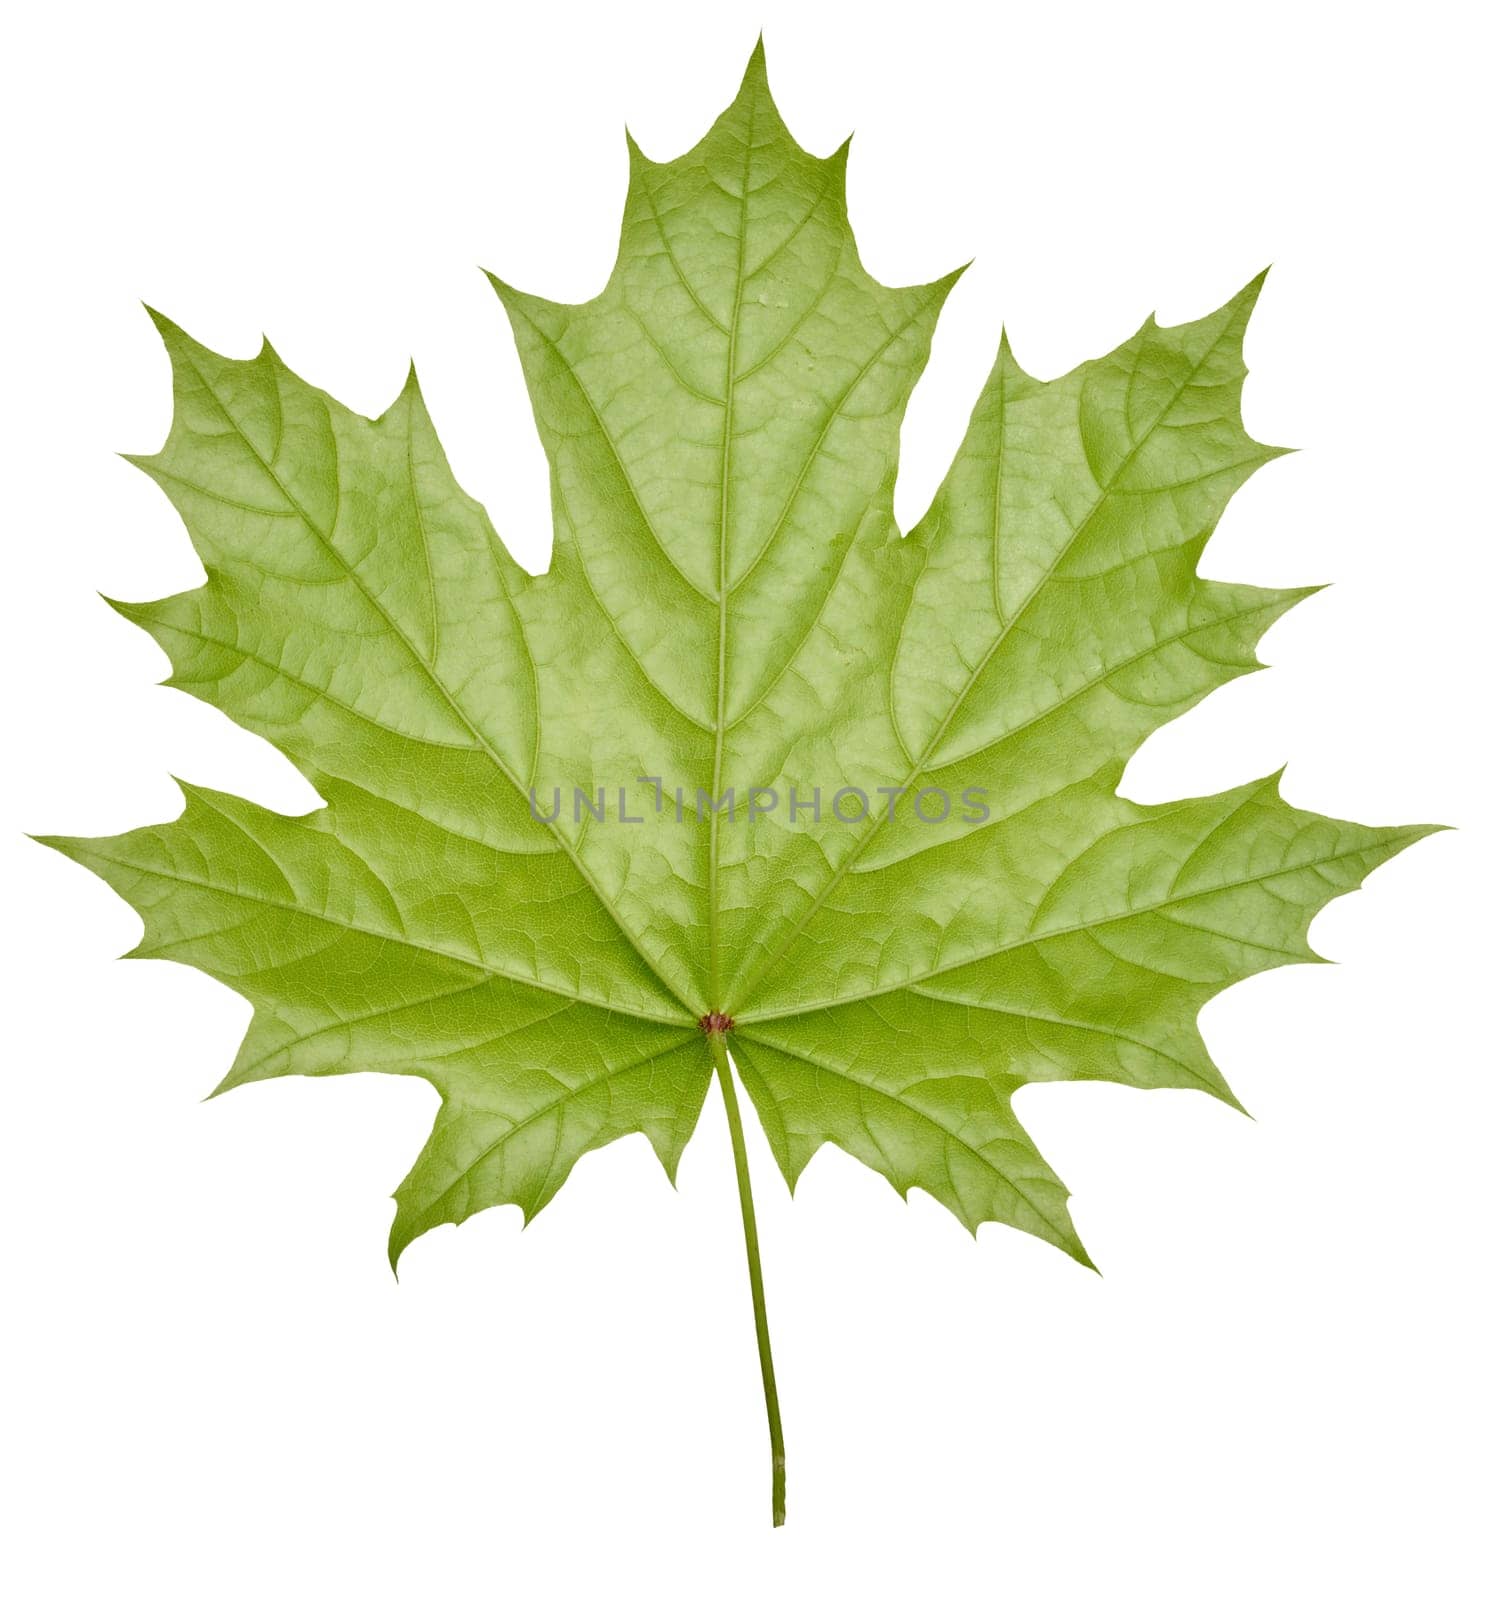 Green Norway maple leaf on isolated background, back side